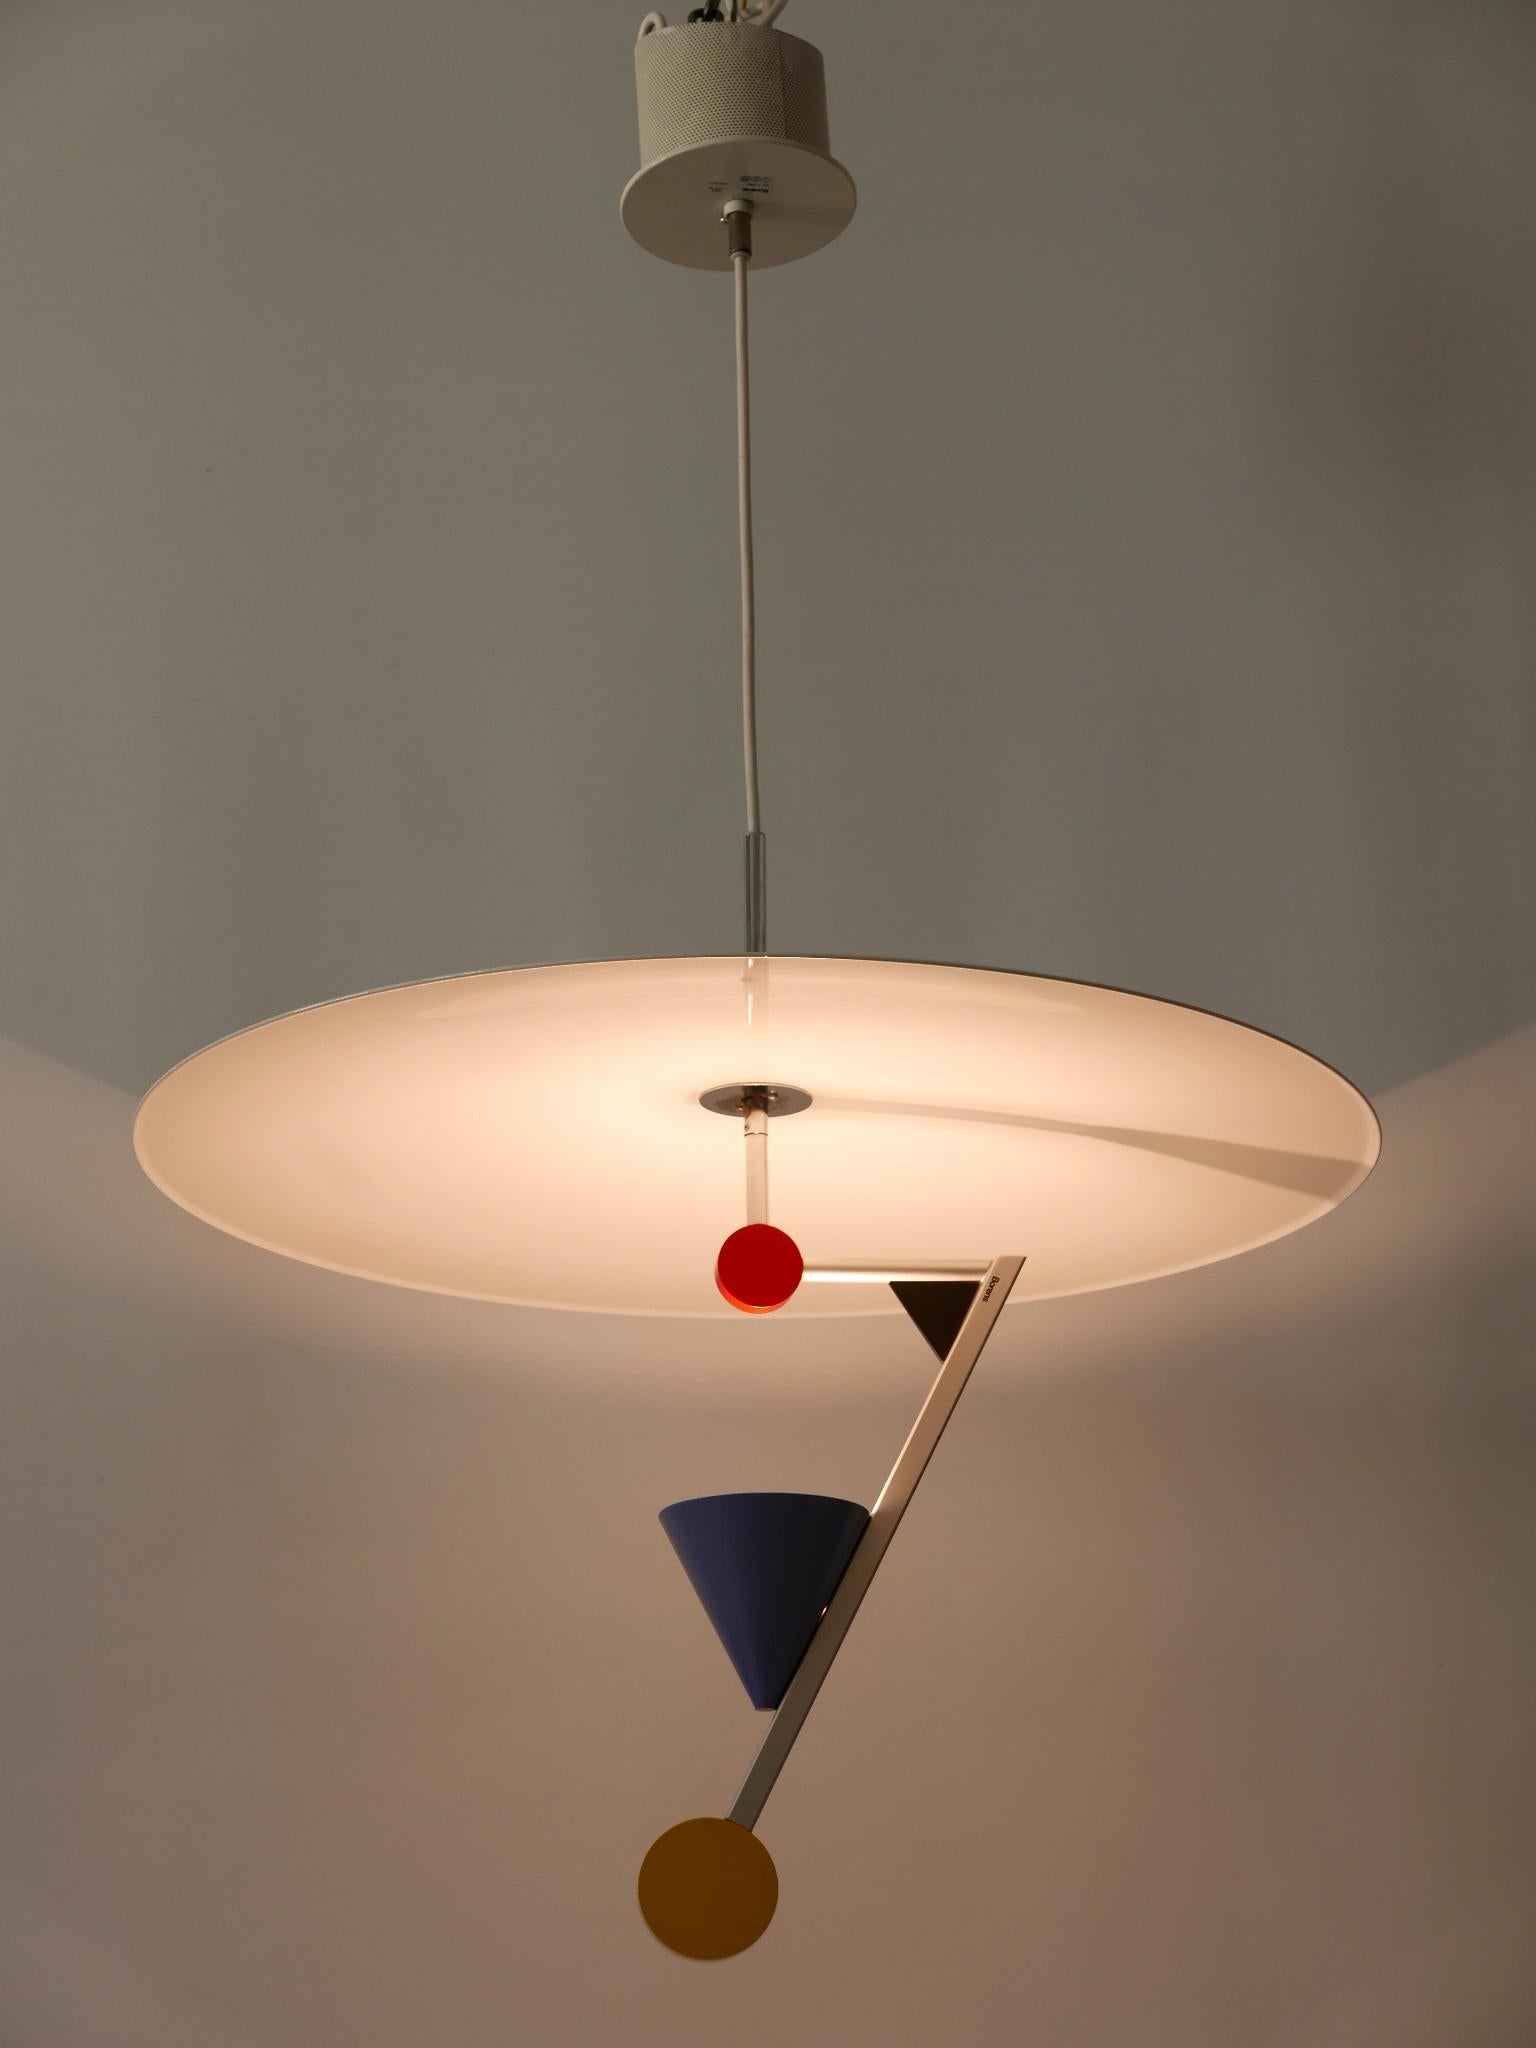 Incroyables lampes suspendues postmodernes Halo There d'Olle Andersson pour Borens 1982 en vente 4